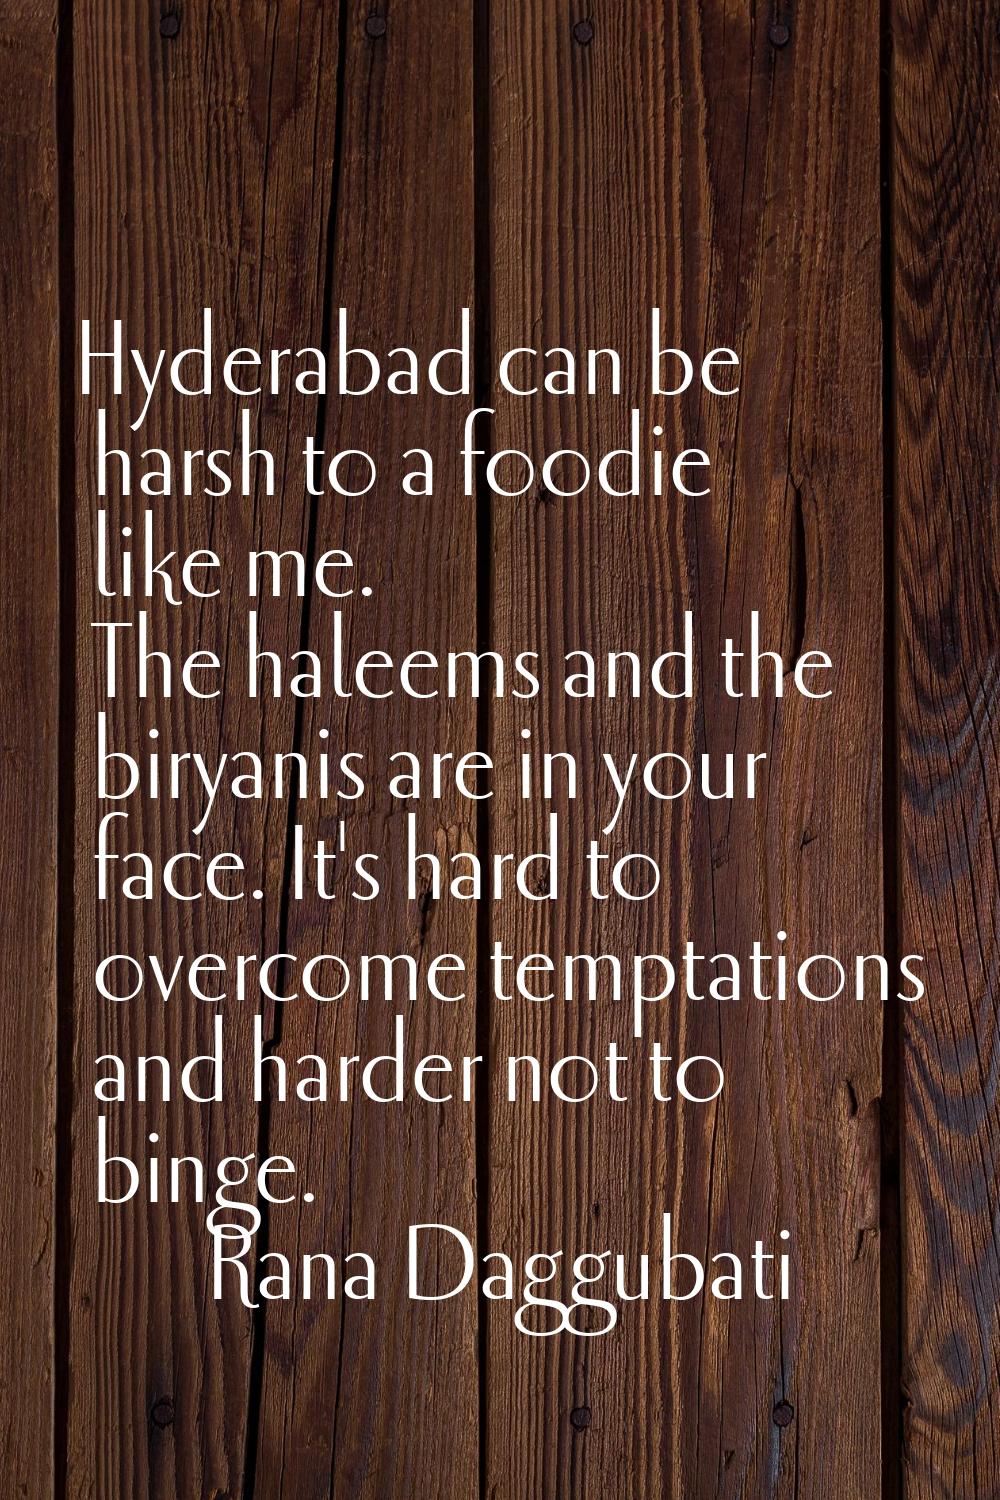 Hyderabad can be harsh to a foodie like me. The haleems and the biryanis are in your face. It's har